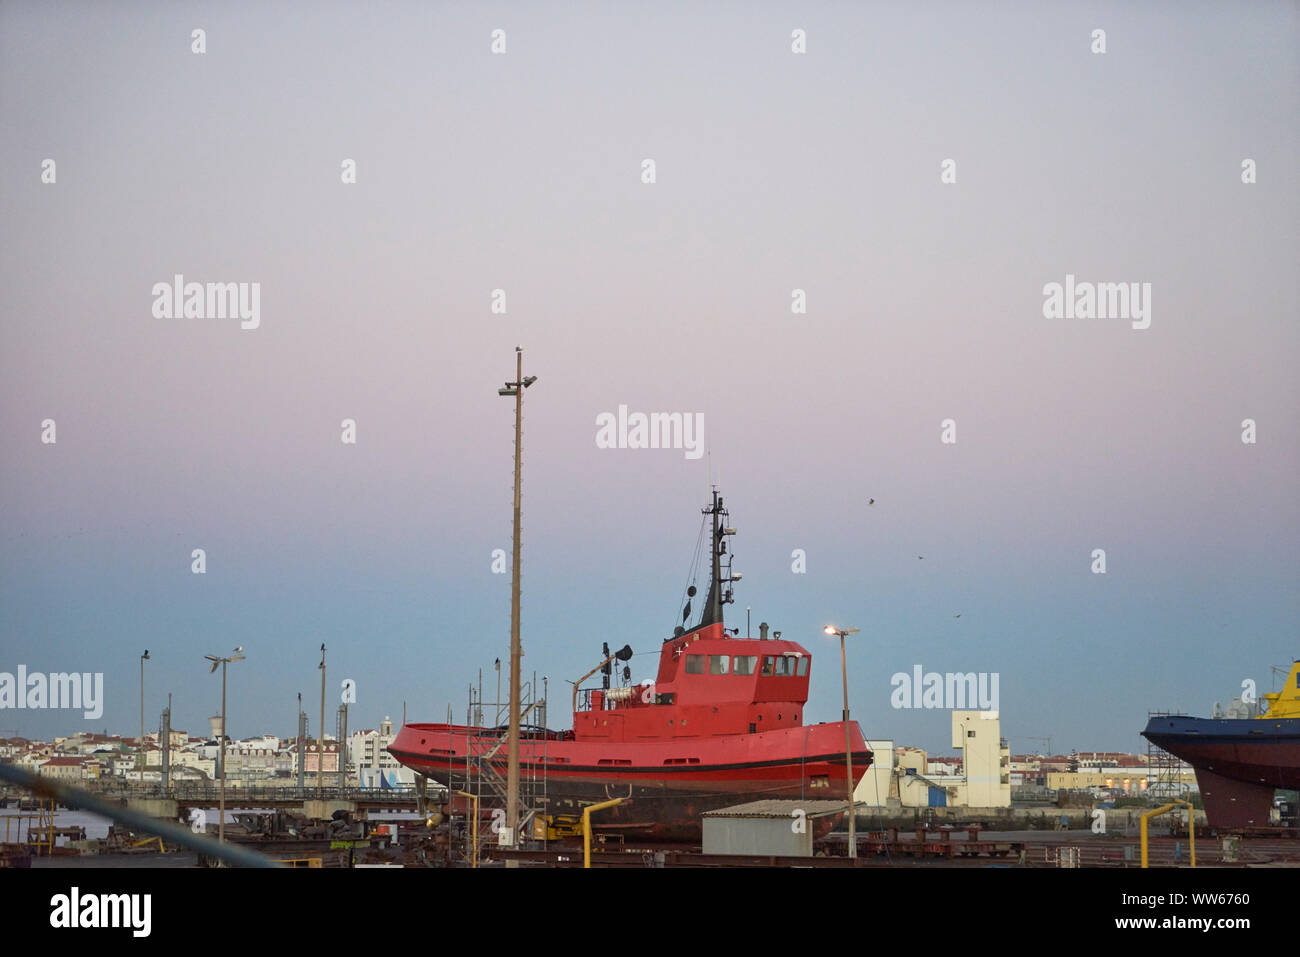 Red boat in a shipyard near the town in the harbour, sky Stock Photo